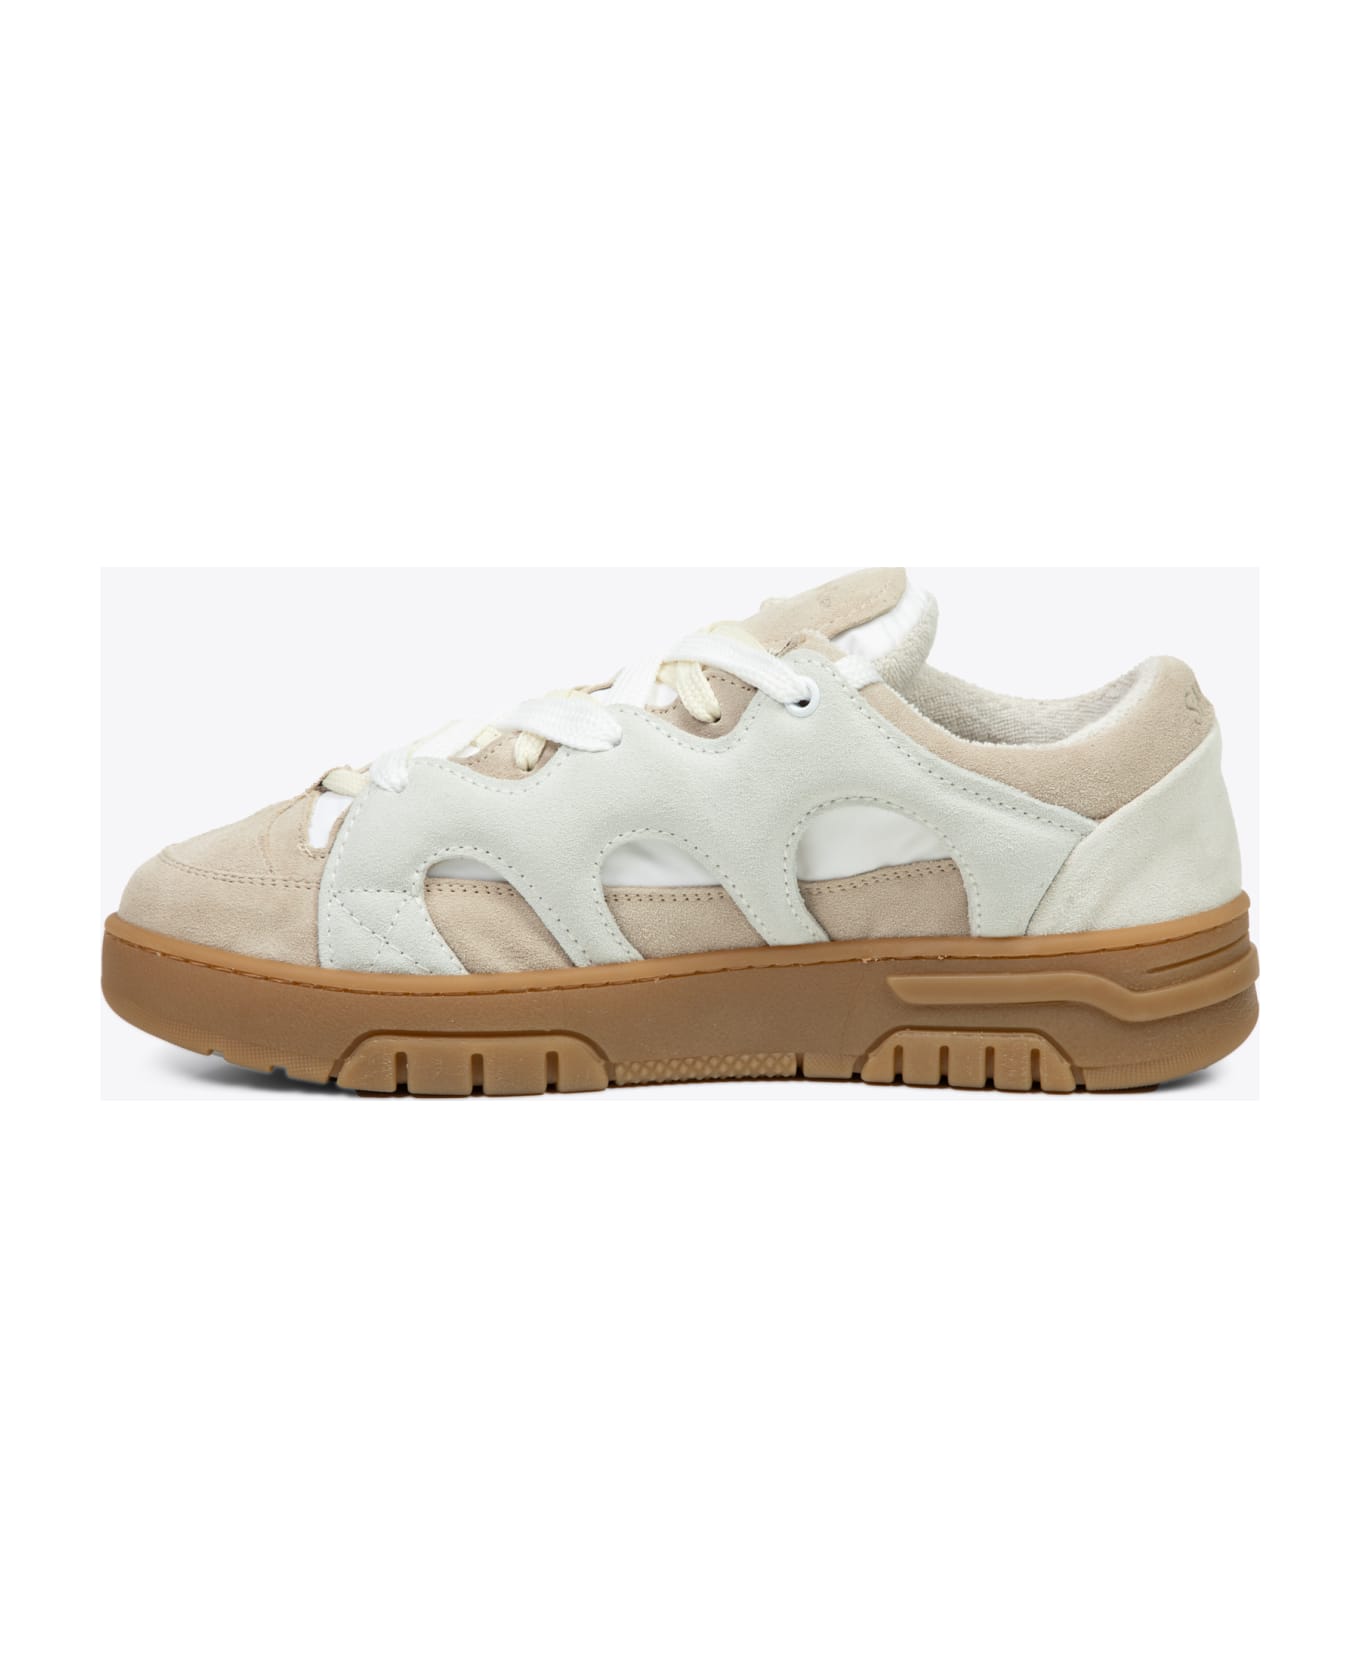 Paura Tr - Suede - New Bomber White Nylon And Beige Suede Low Sneaker - Crema/bianco